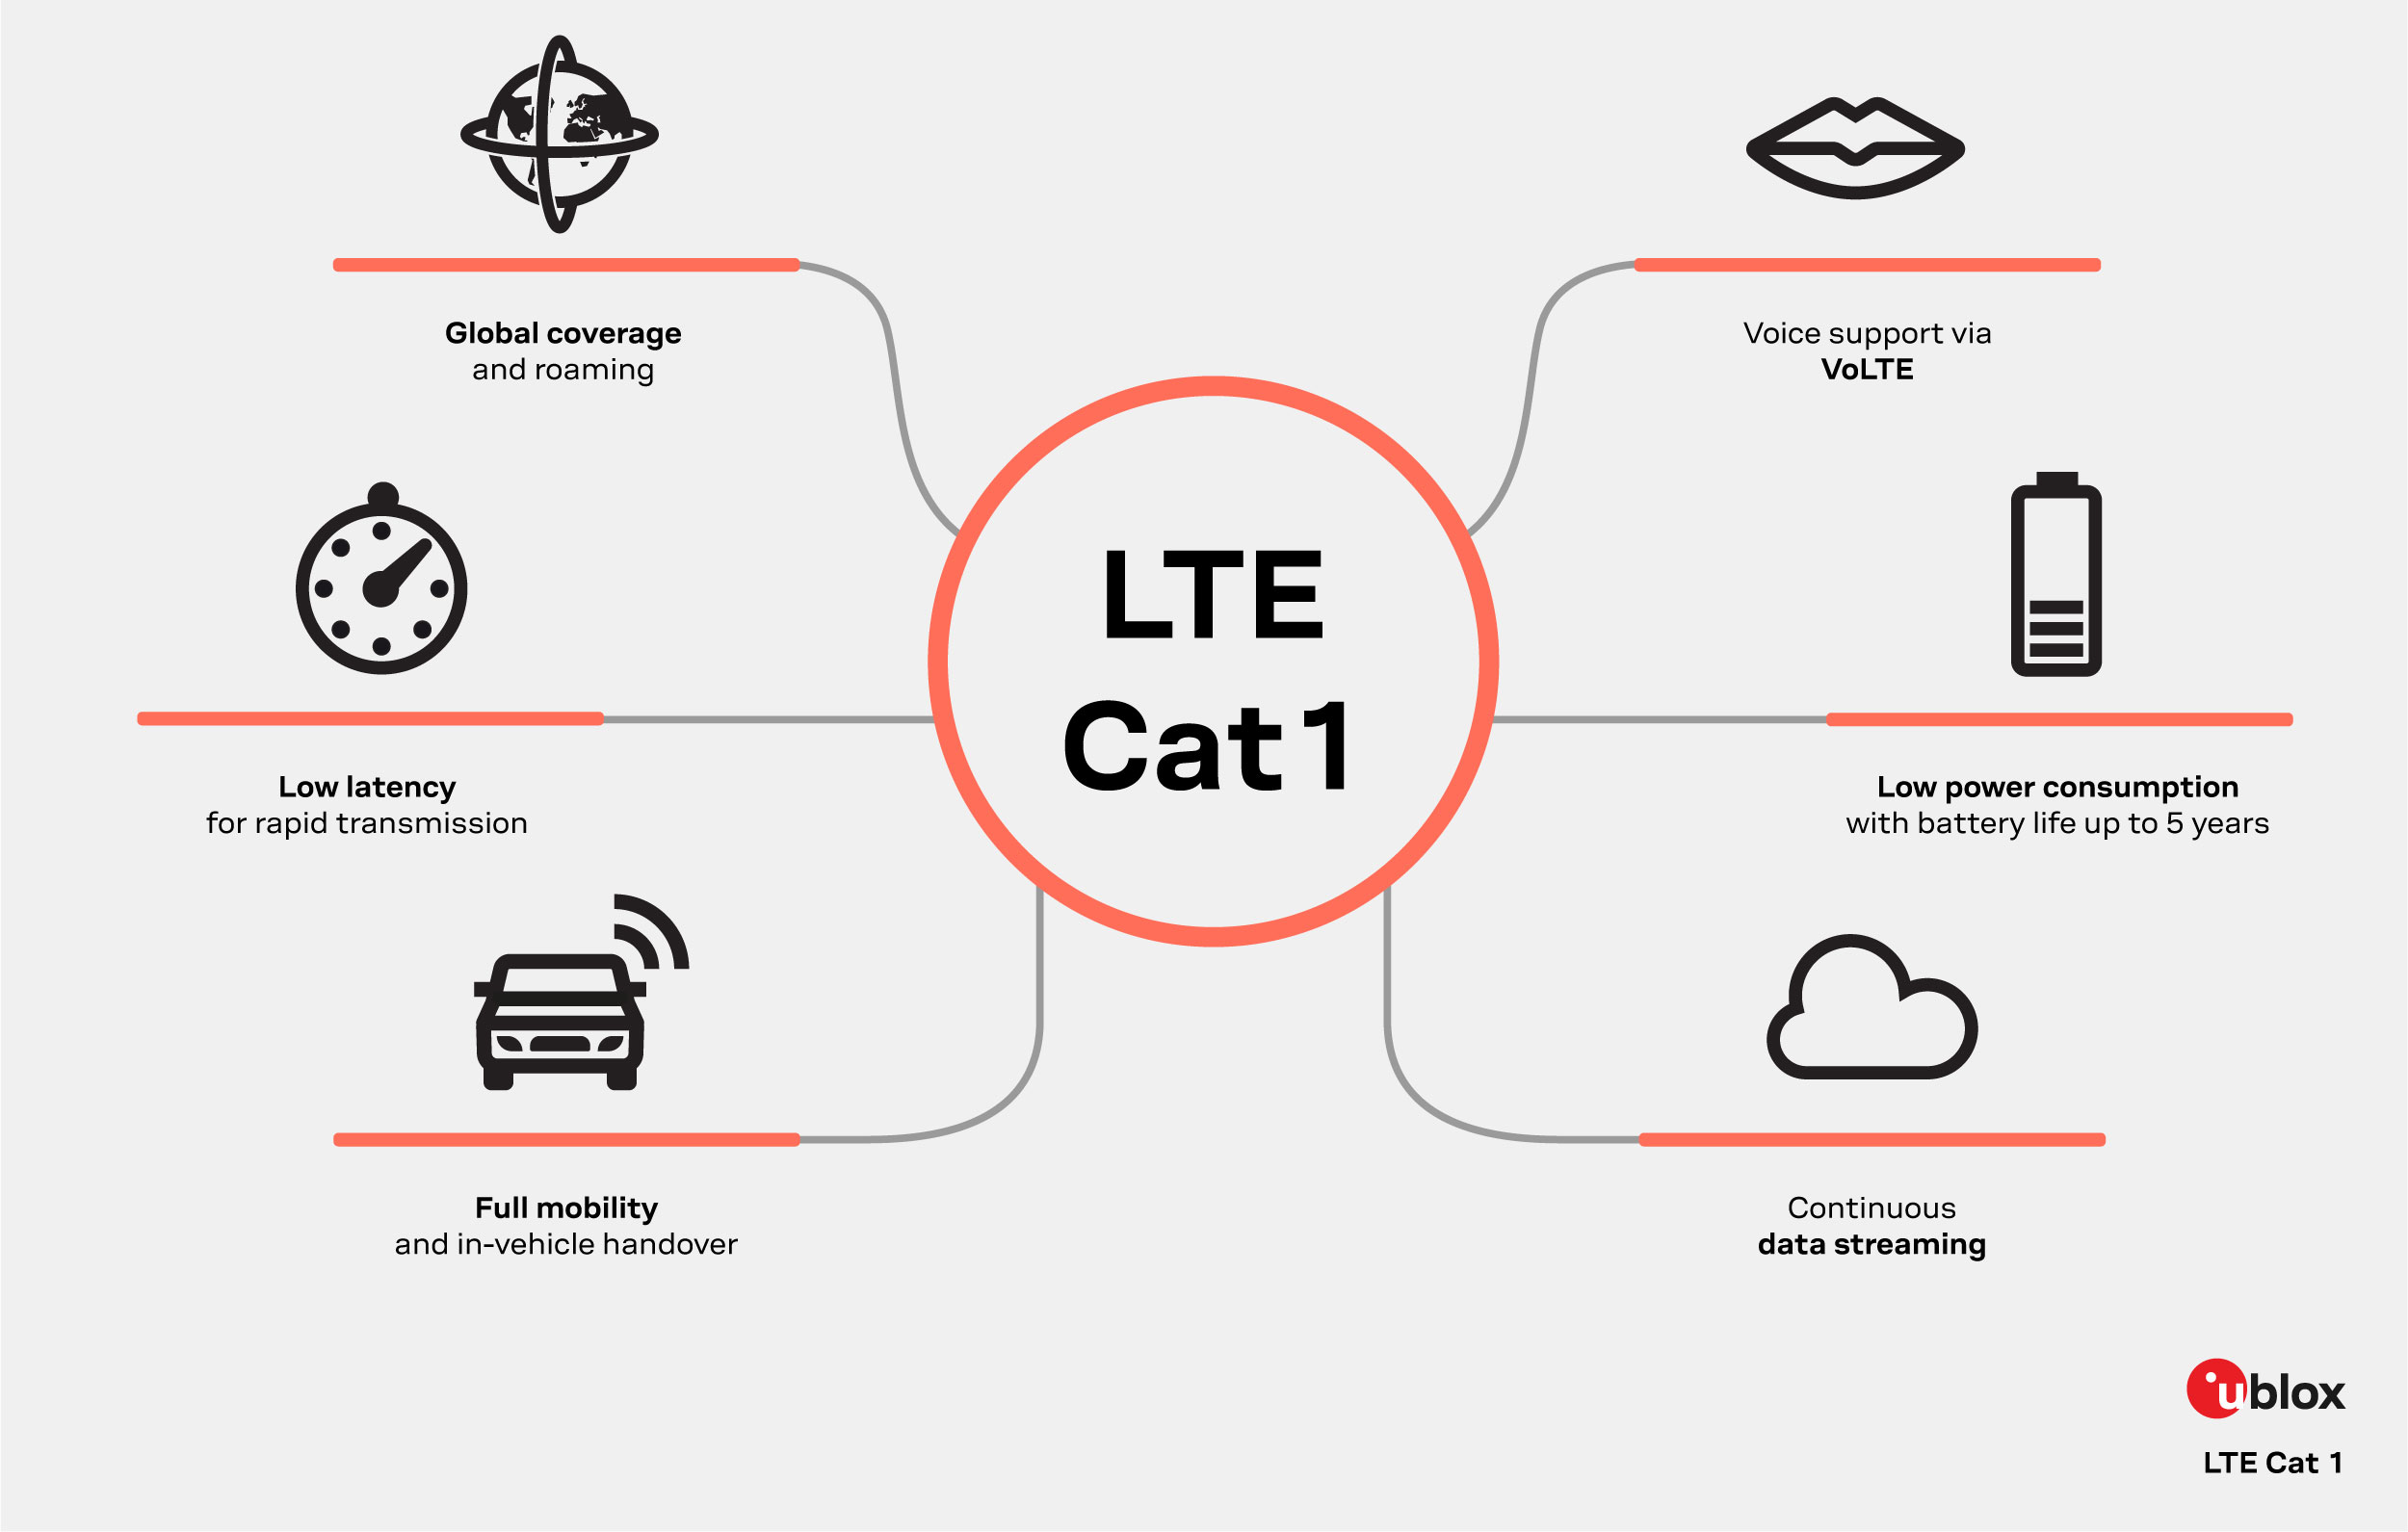 key features of LTE Cat 1